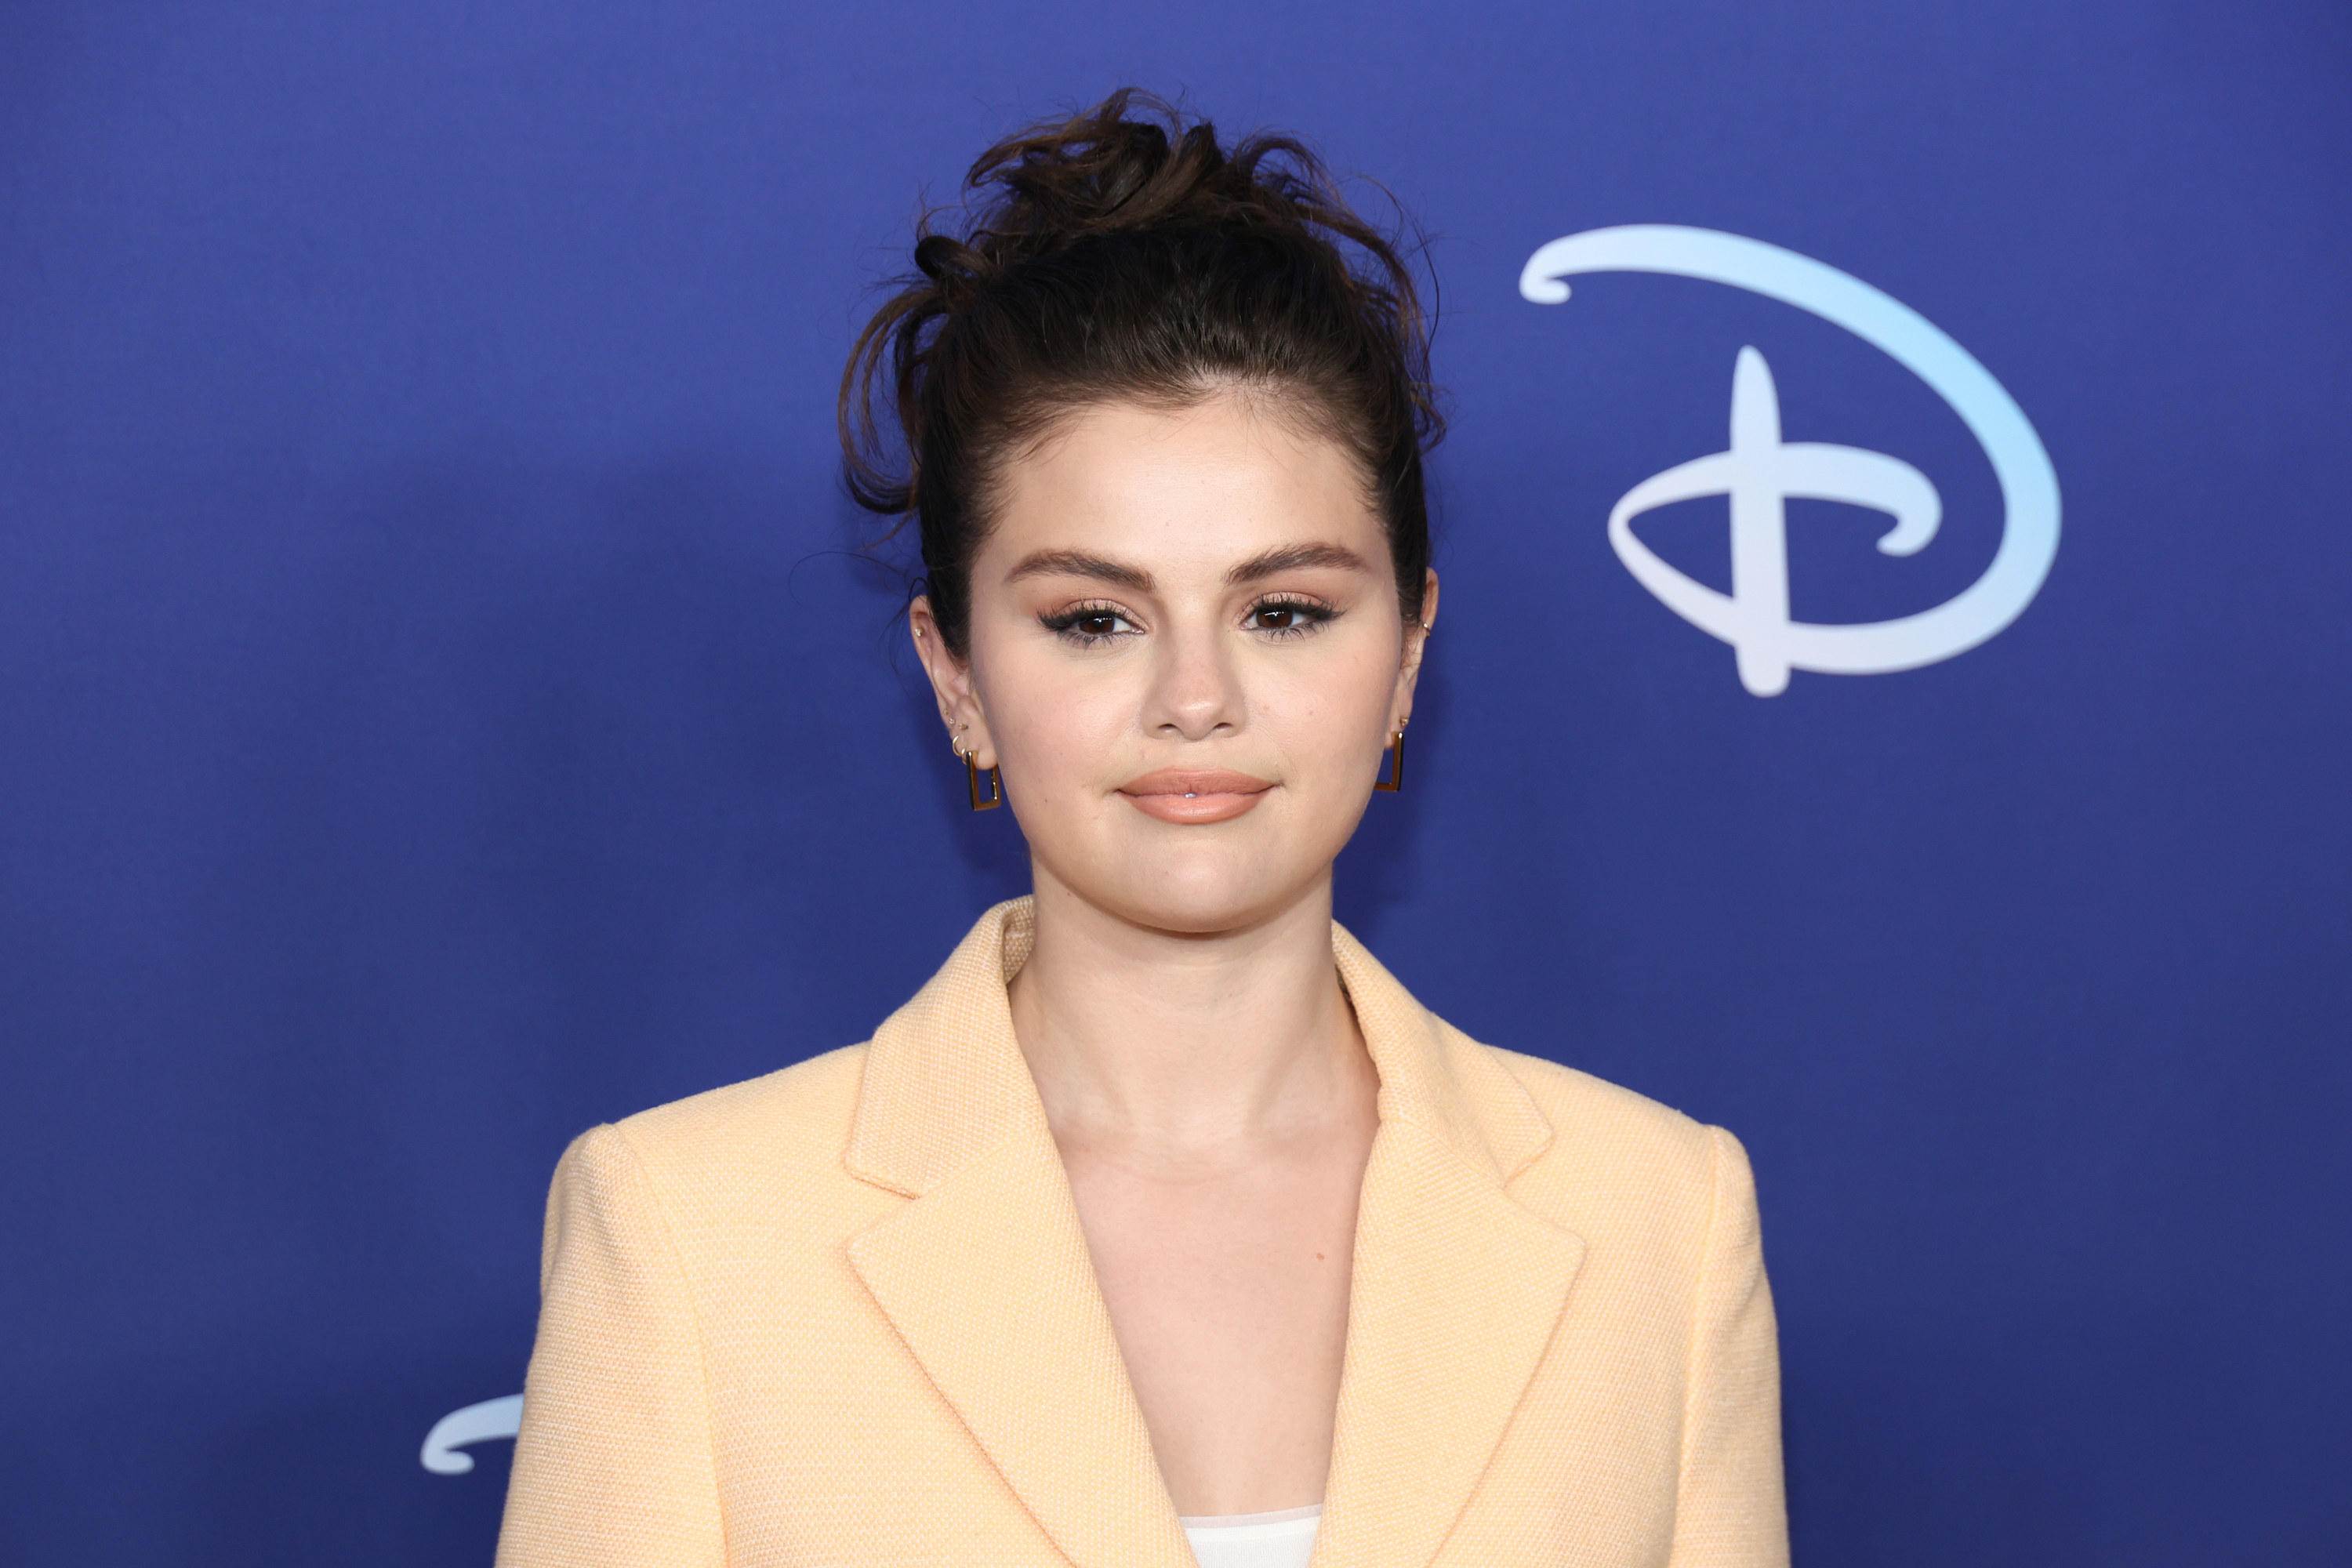 Selena Gomez attends the 2022 ABC Disney Upfront at Basketball City - Pier 36 - South Street on May 17, 2022 in New York City